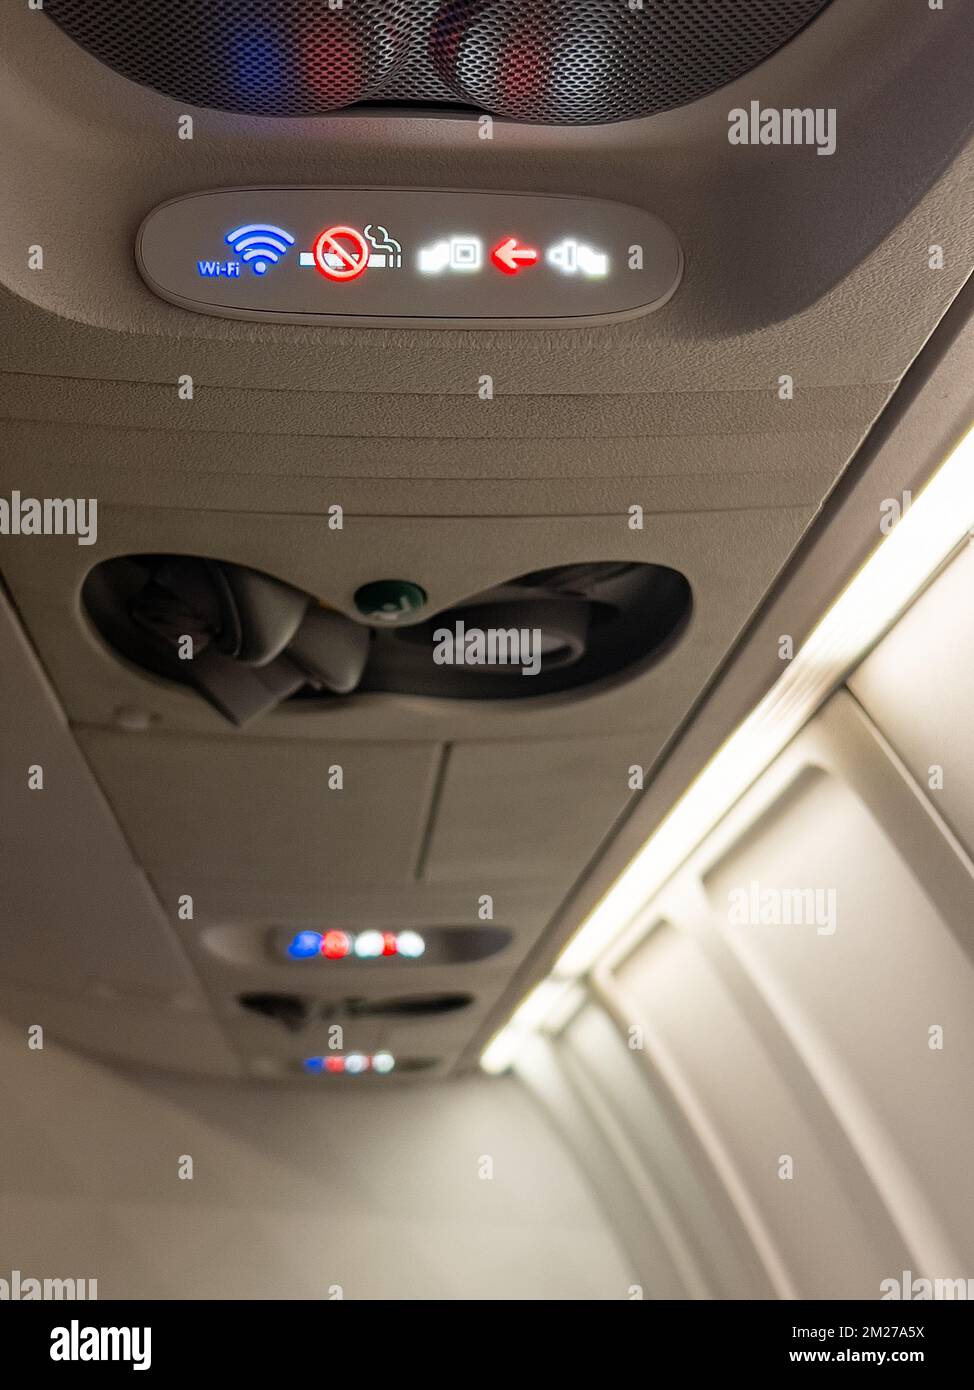 Indicator lights in airplane cabin for wi-fi, no smoking and seat belts. Stock Photo